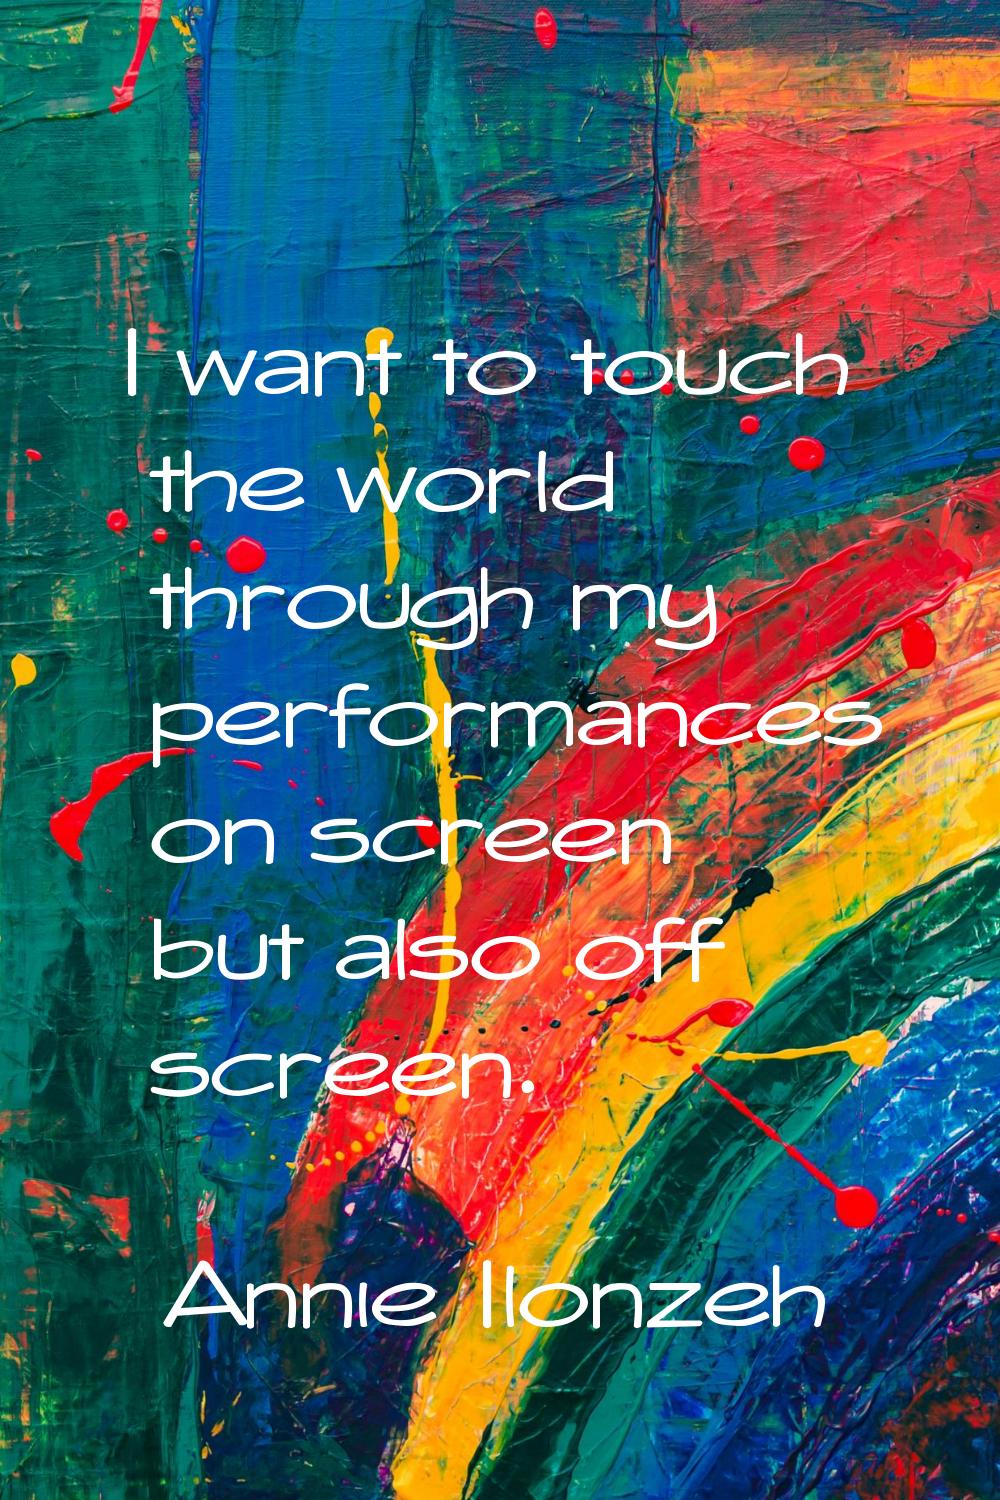 I want to touch the world through my performances on screen but also off screen.